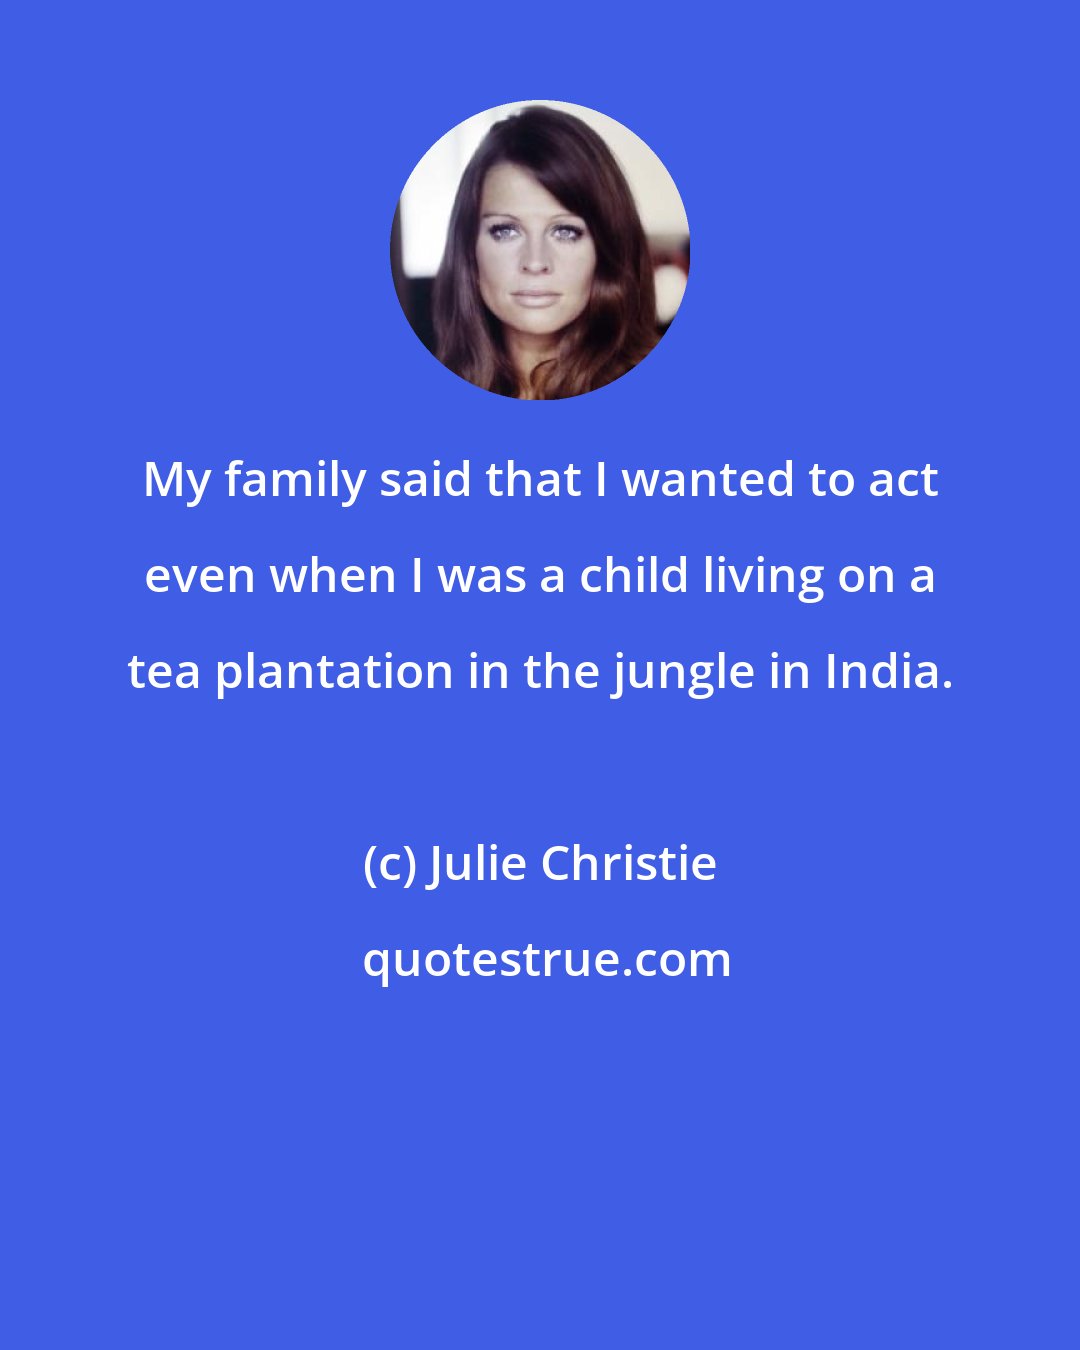 Julie Christie: My family said that I wanted to act even when I was a child living on a tea plantation in the jungle in India.